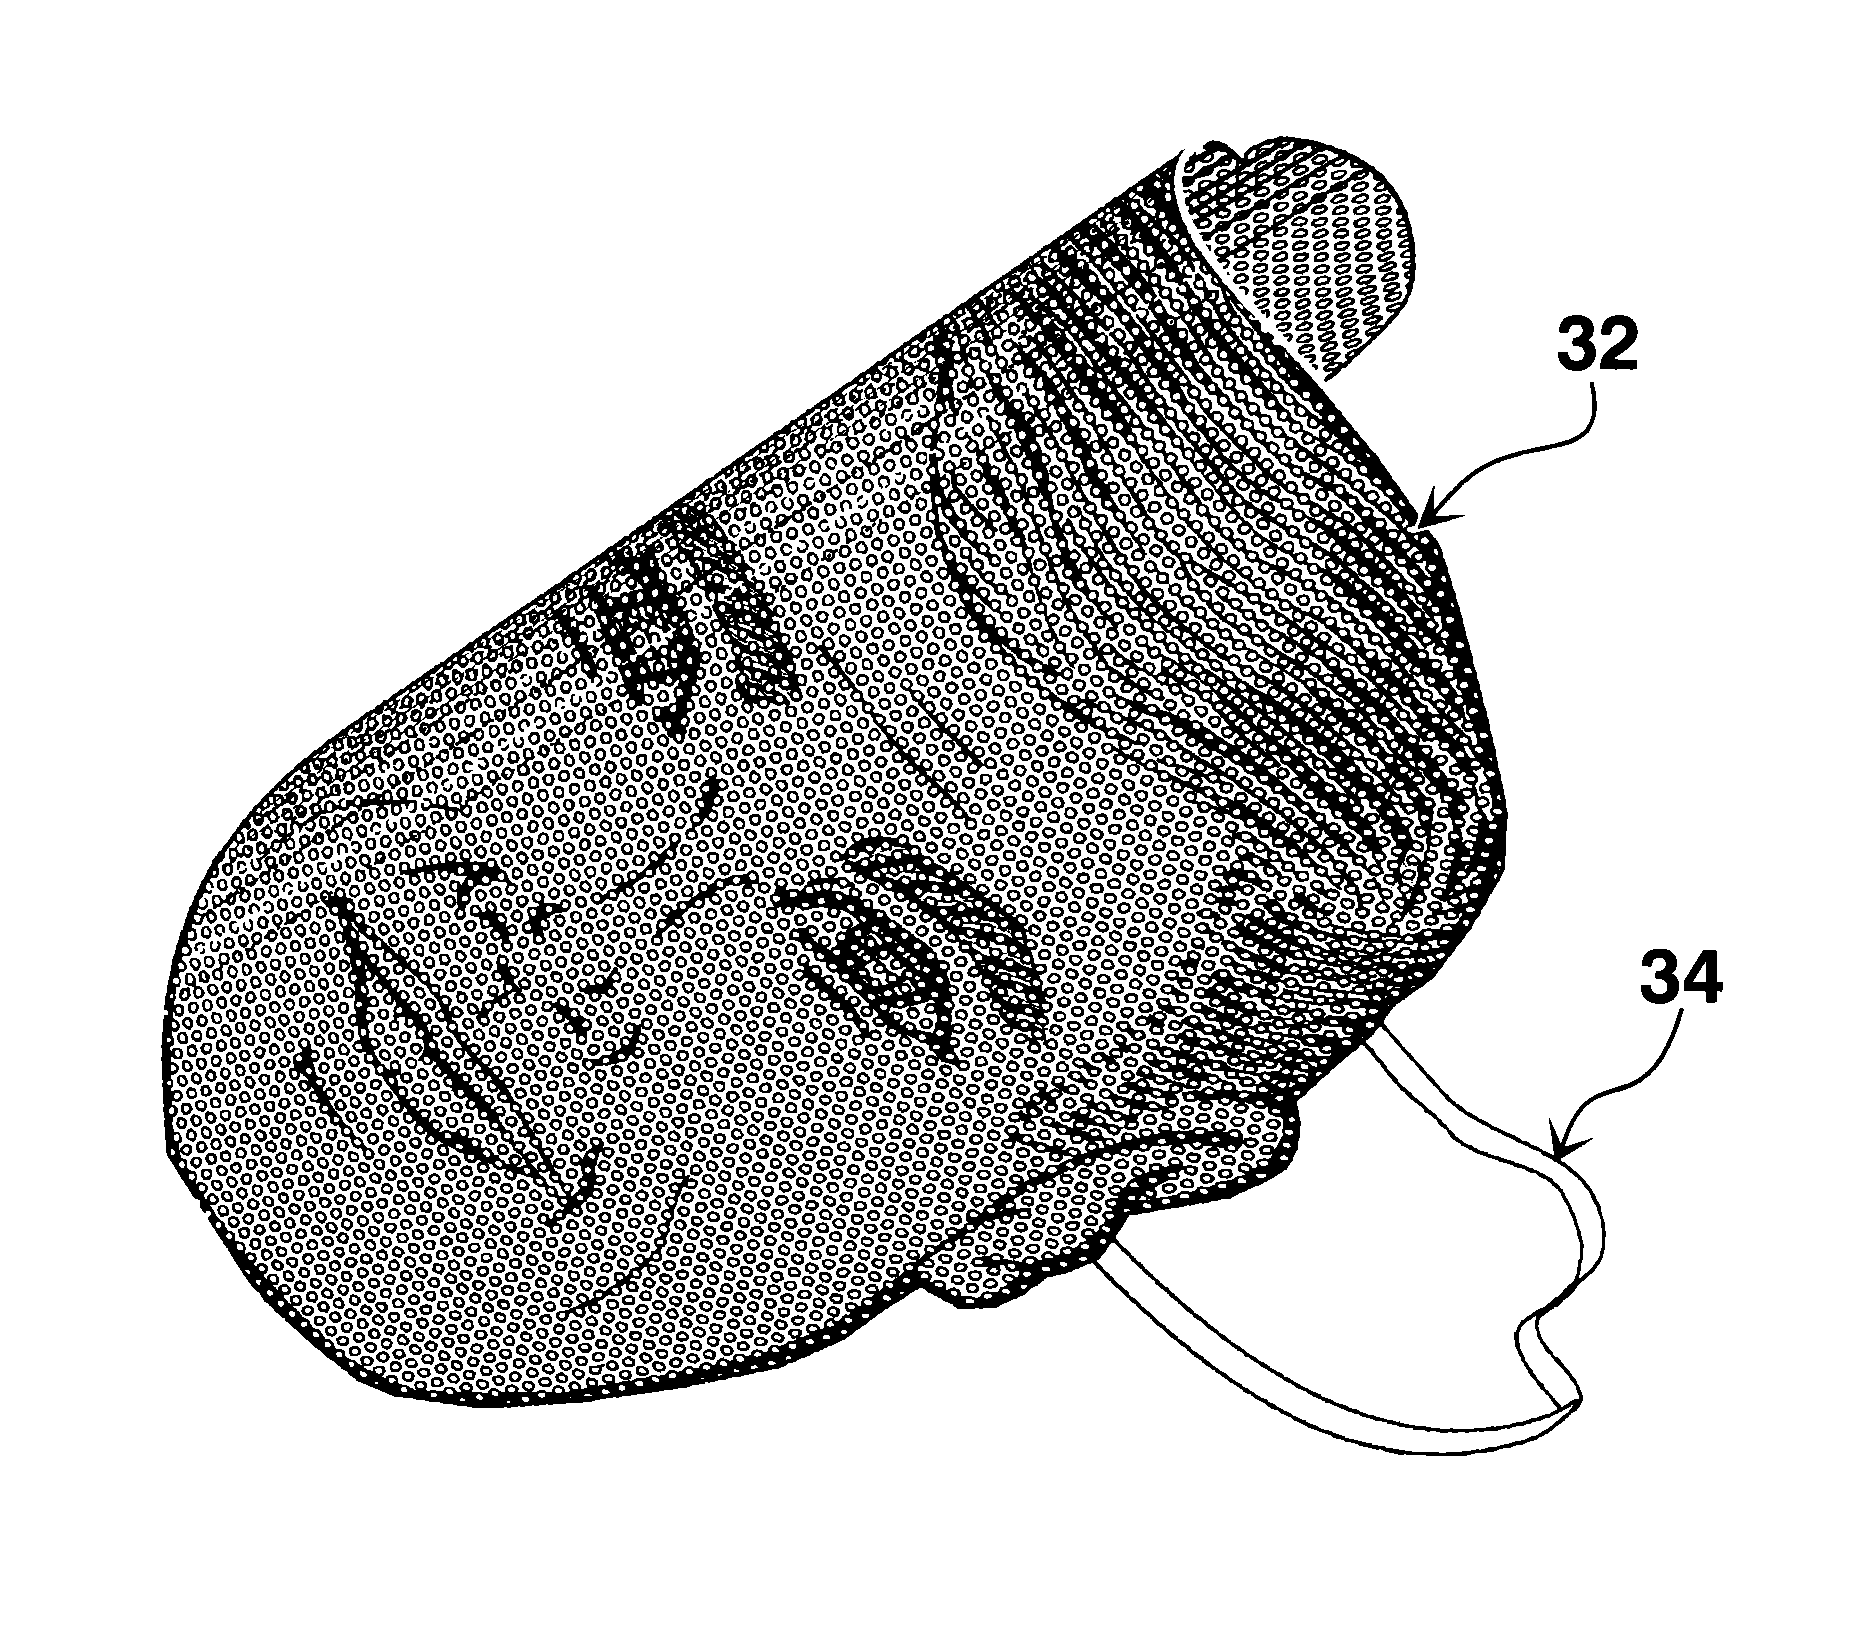 Printable facial mask and printable facial mask system with enhanced peripheral visibility